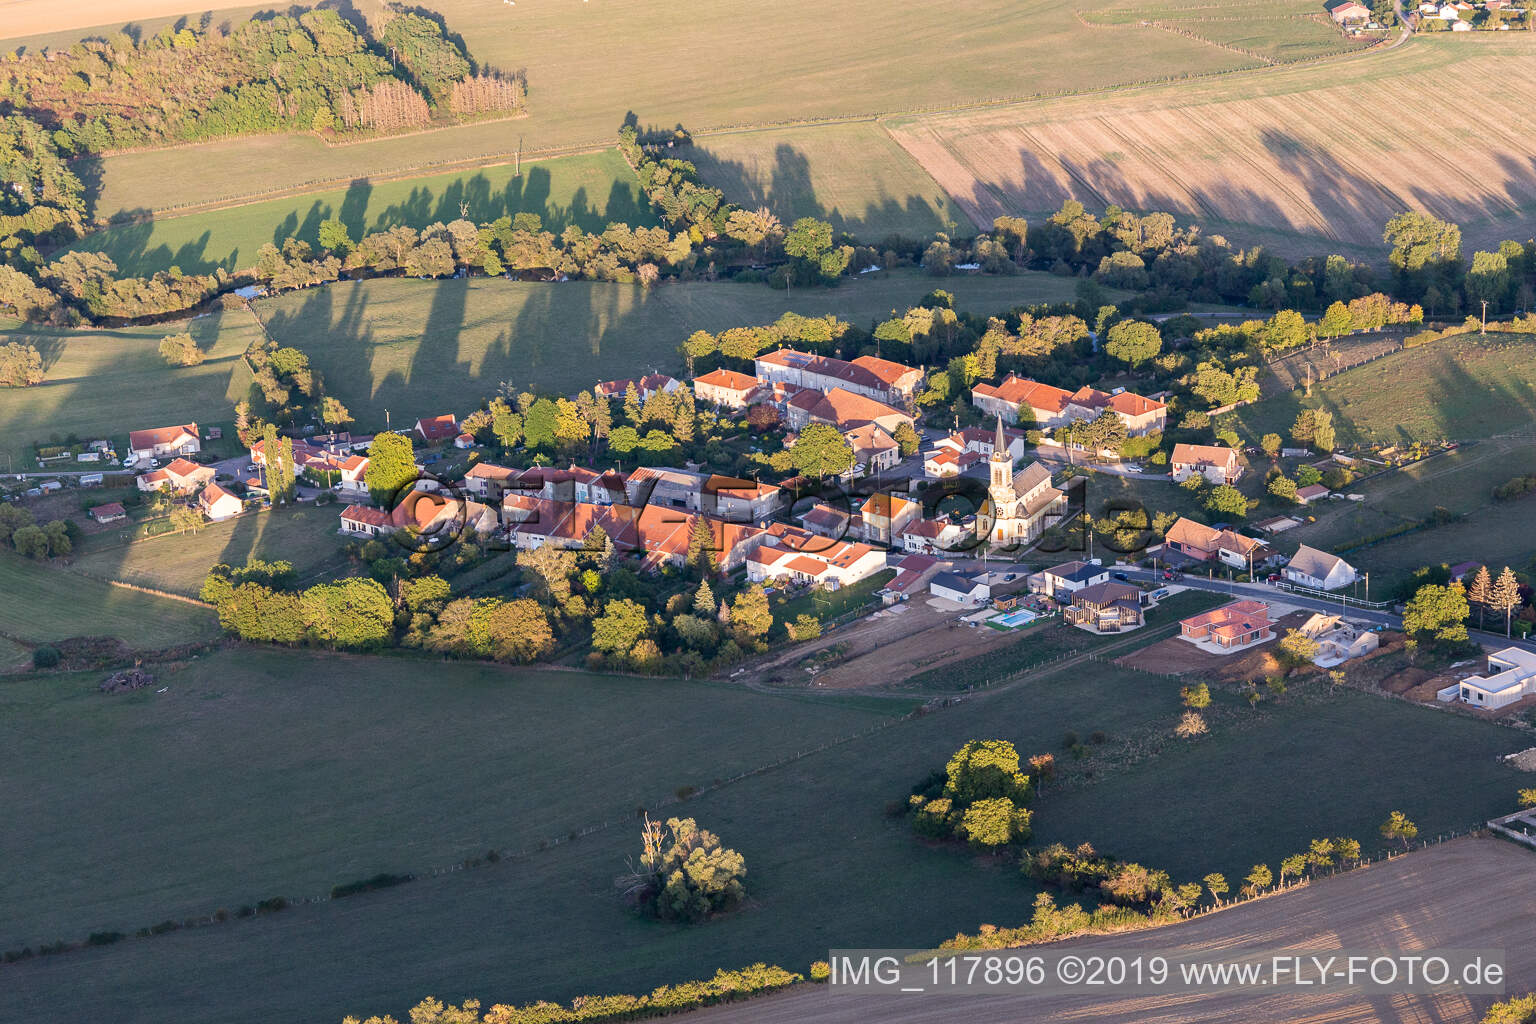 Aerial view of Tantonville in the state Meurthe et Moselle, France